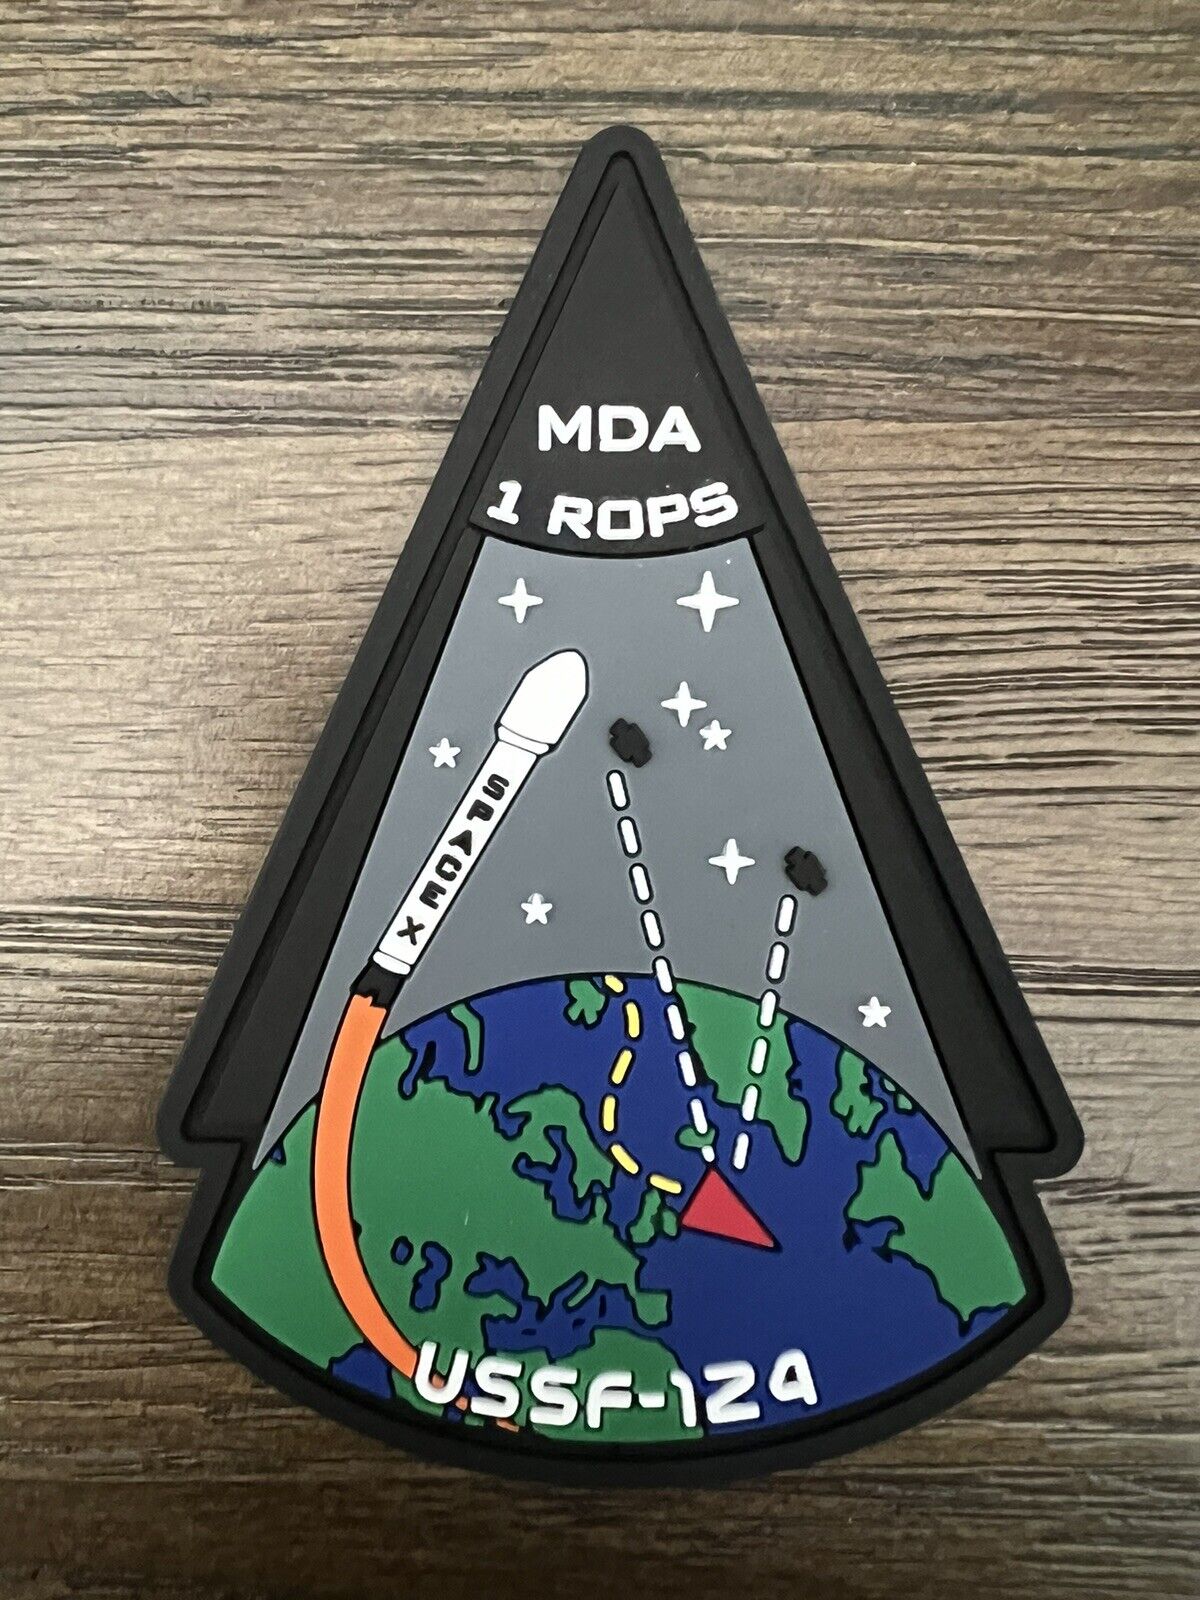 SPACEX FALCON 9 USSF-124 MISSILE DEFENSE AGENCY 1 ROPS SPACE MISSION PATCH